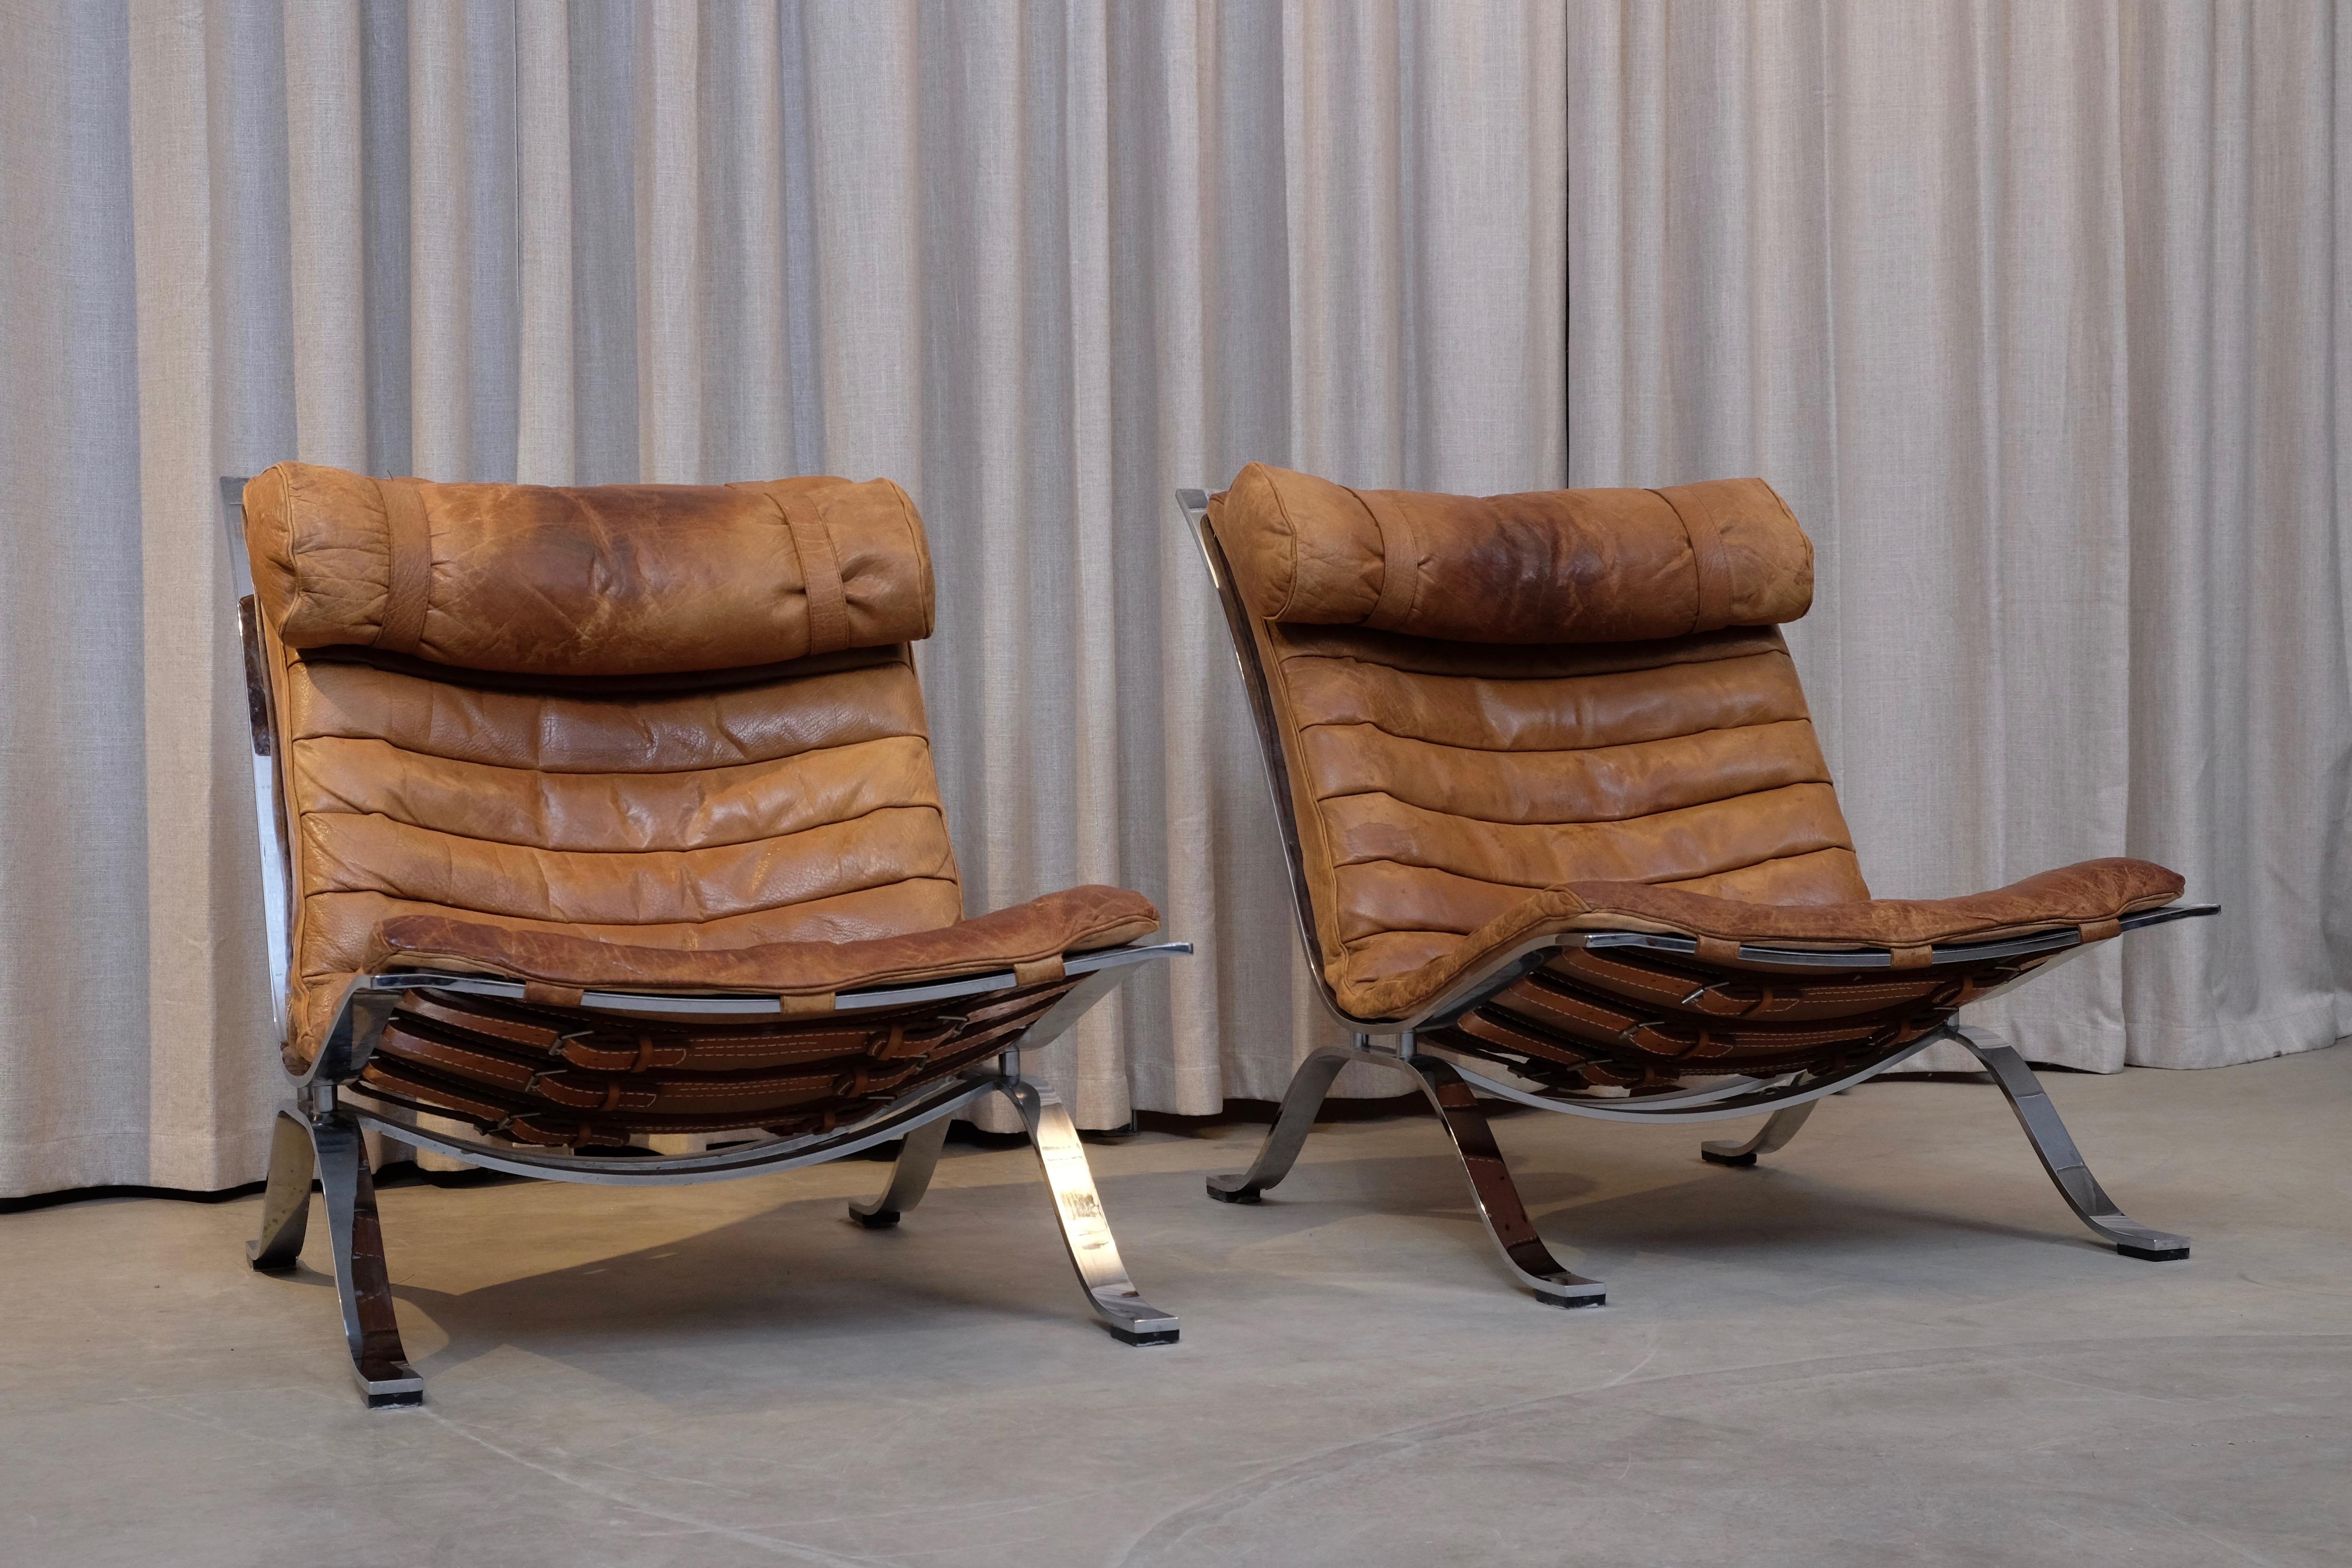 Arne Norell Ari Easy Chairs in Cognac Brown Leather, Sweden, 1960s For Sale 3